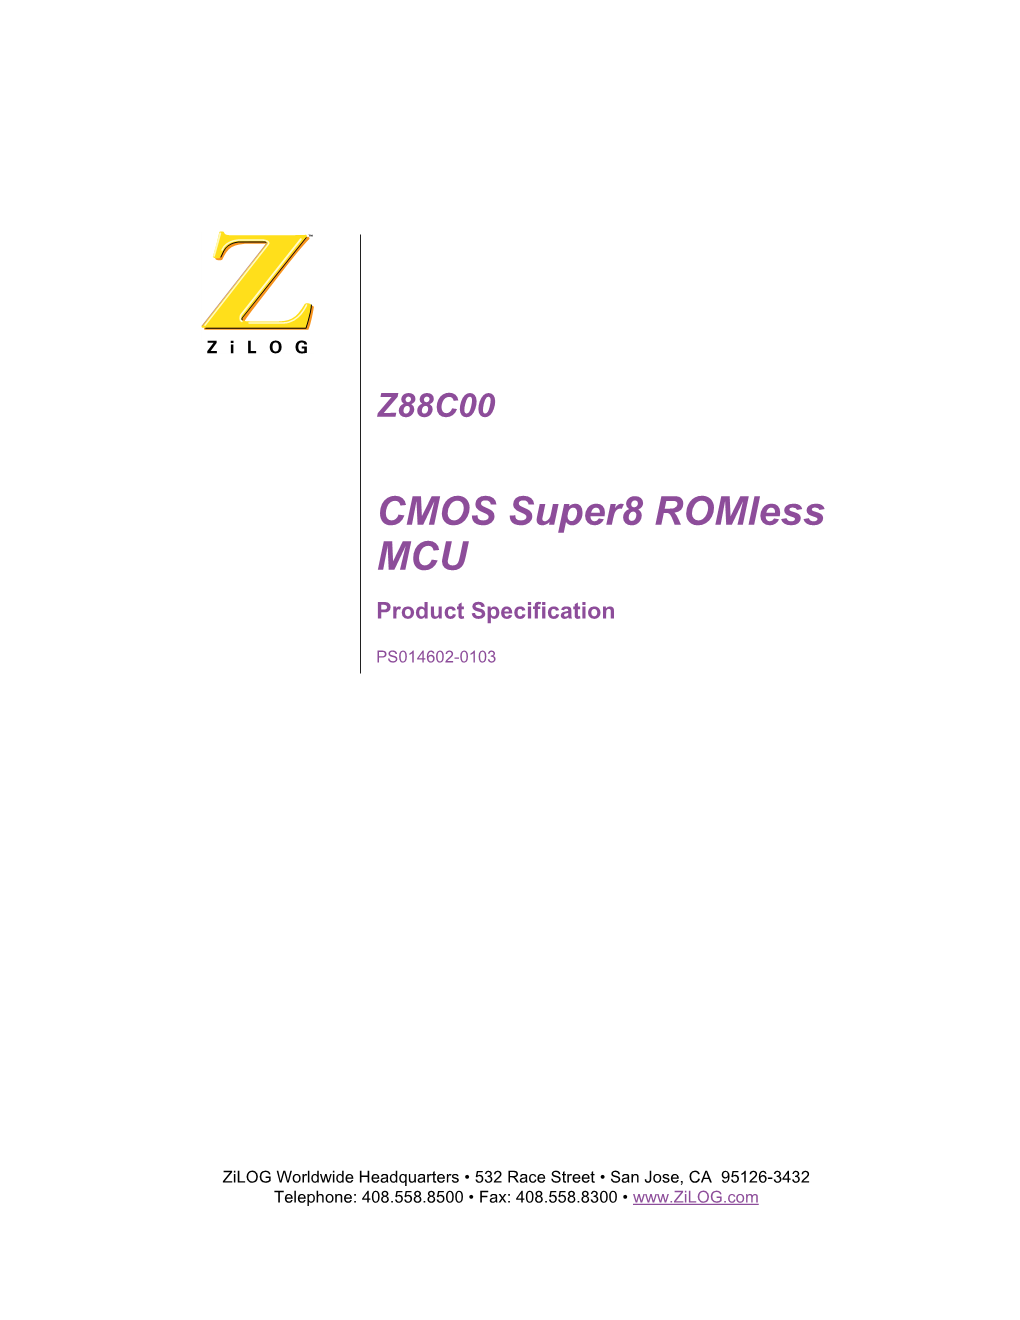 CMOS Super8 Romless MCU Product Specification